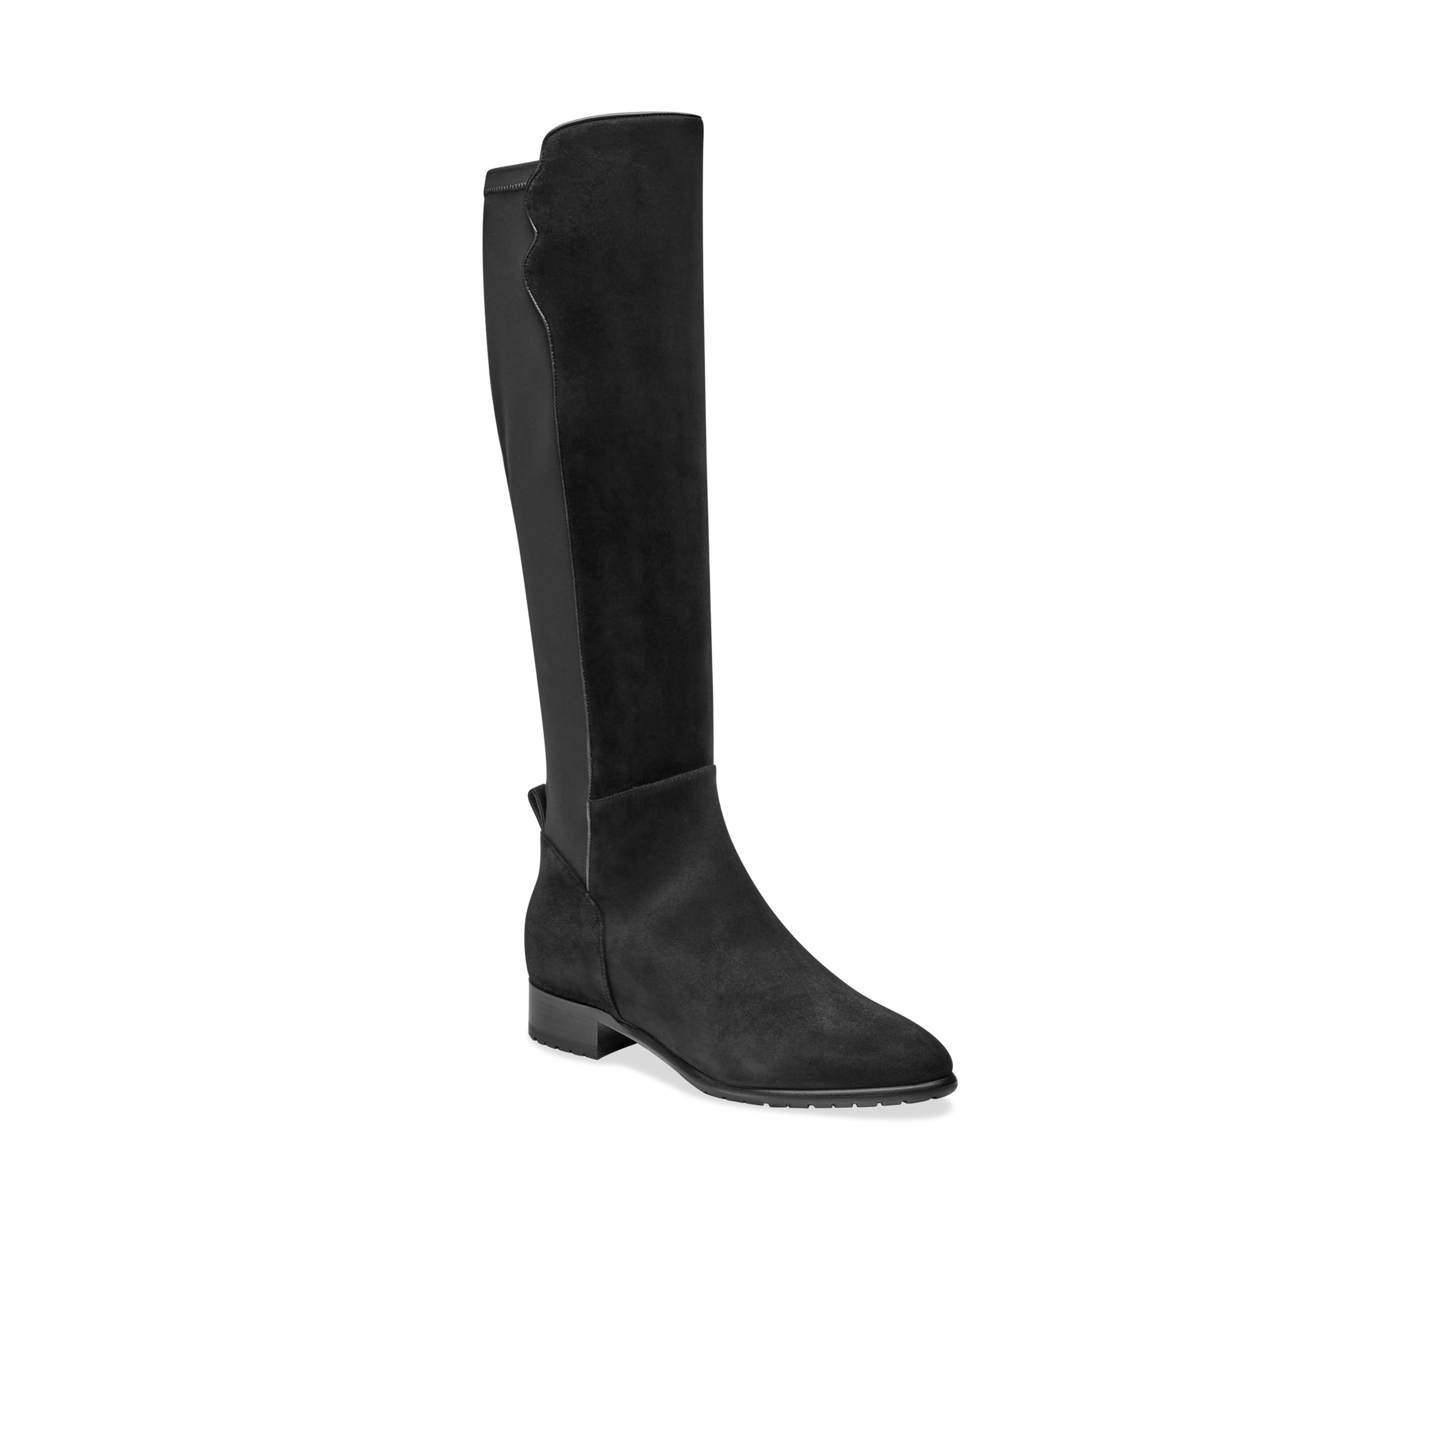 Perfect Stretch Boot 30 | Black Boots for Women | Sarah Flint Water-Resistant Black Suede Almond Closed Toe Boots | Italian Bespoke Boots with The